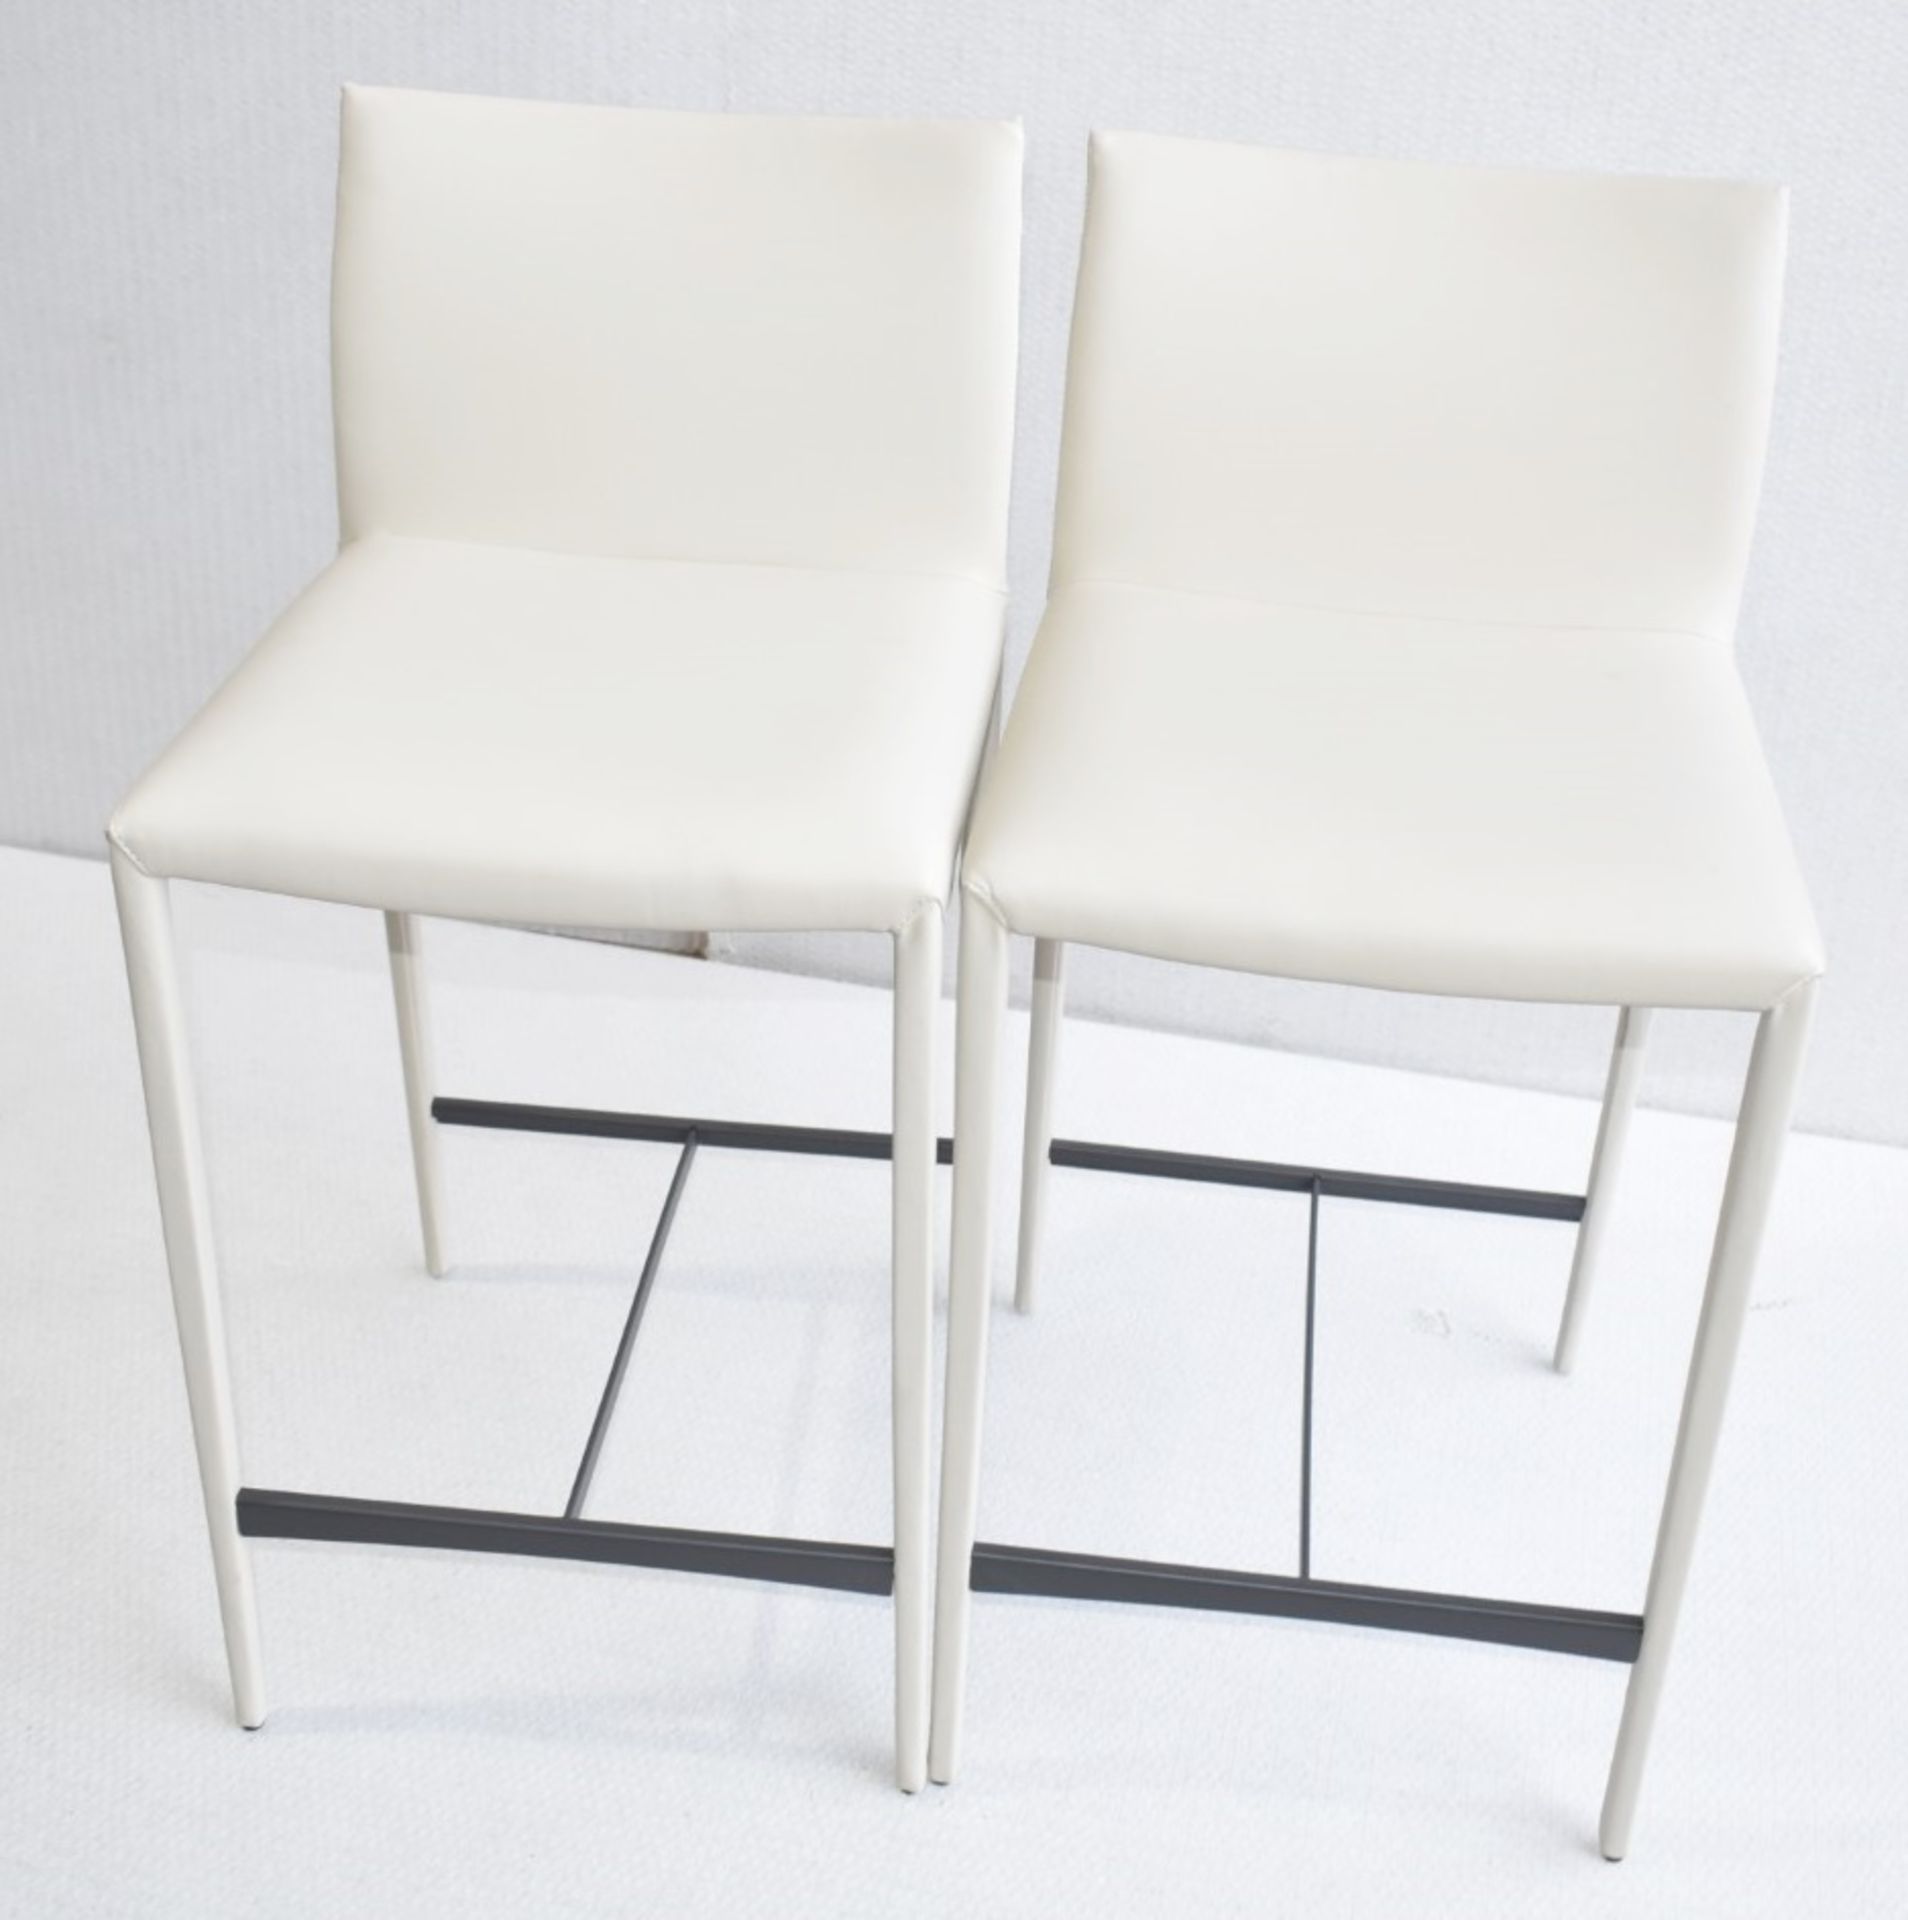 Pair of CATTELAN ITALIA 'Norma' Designer Fully Upholstered Stools in a Light Synthetic Leather - Image 6 of 9